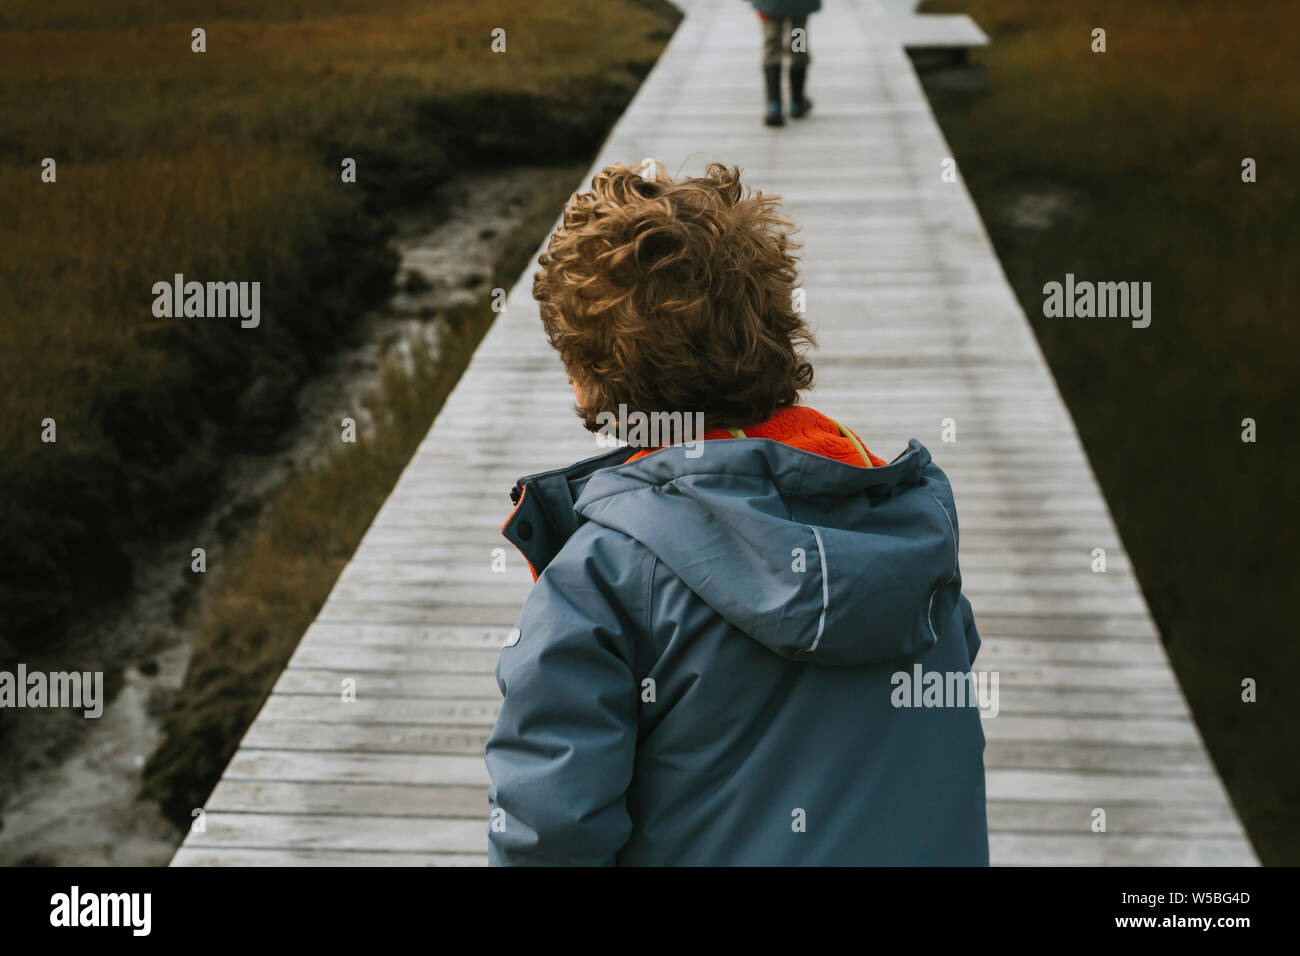 Rear view of child with curly hair on boardwalk Stock Photo